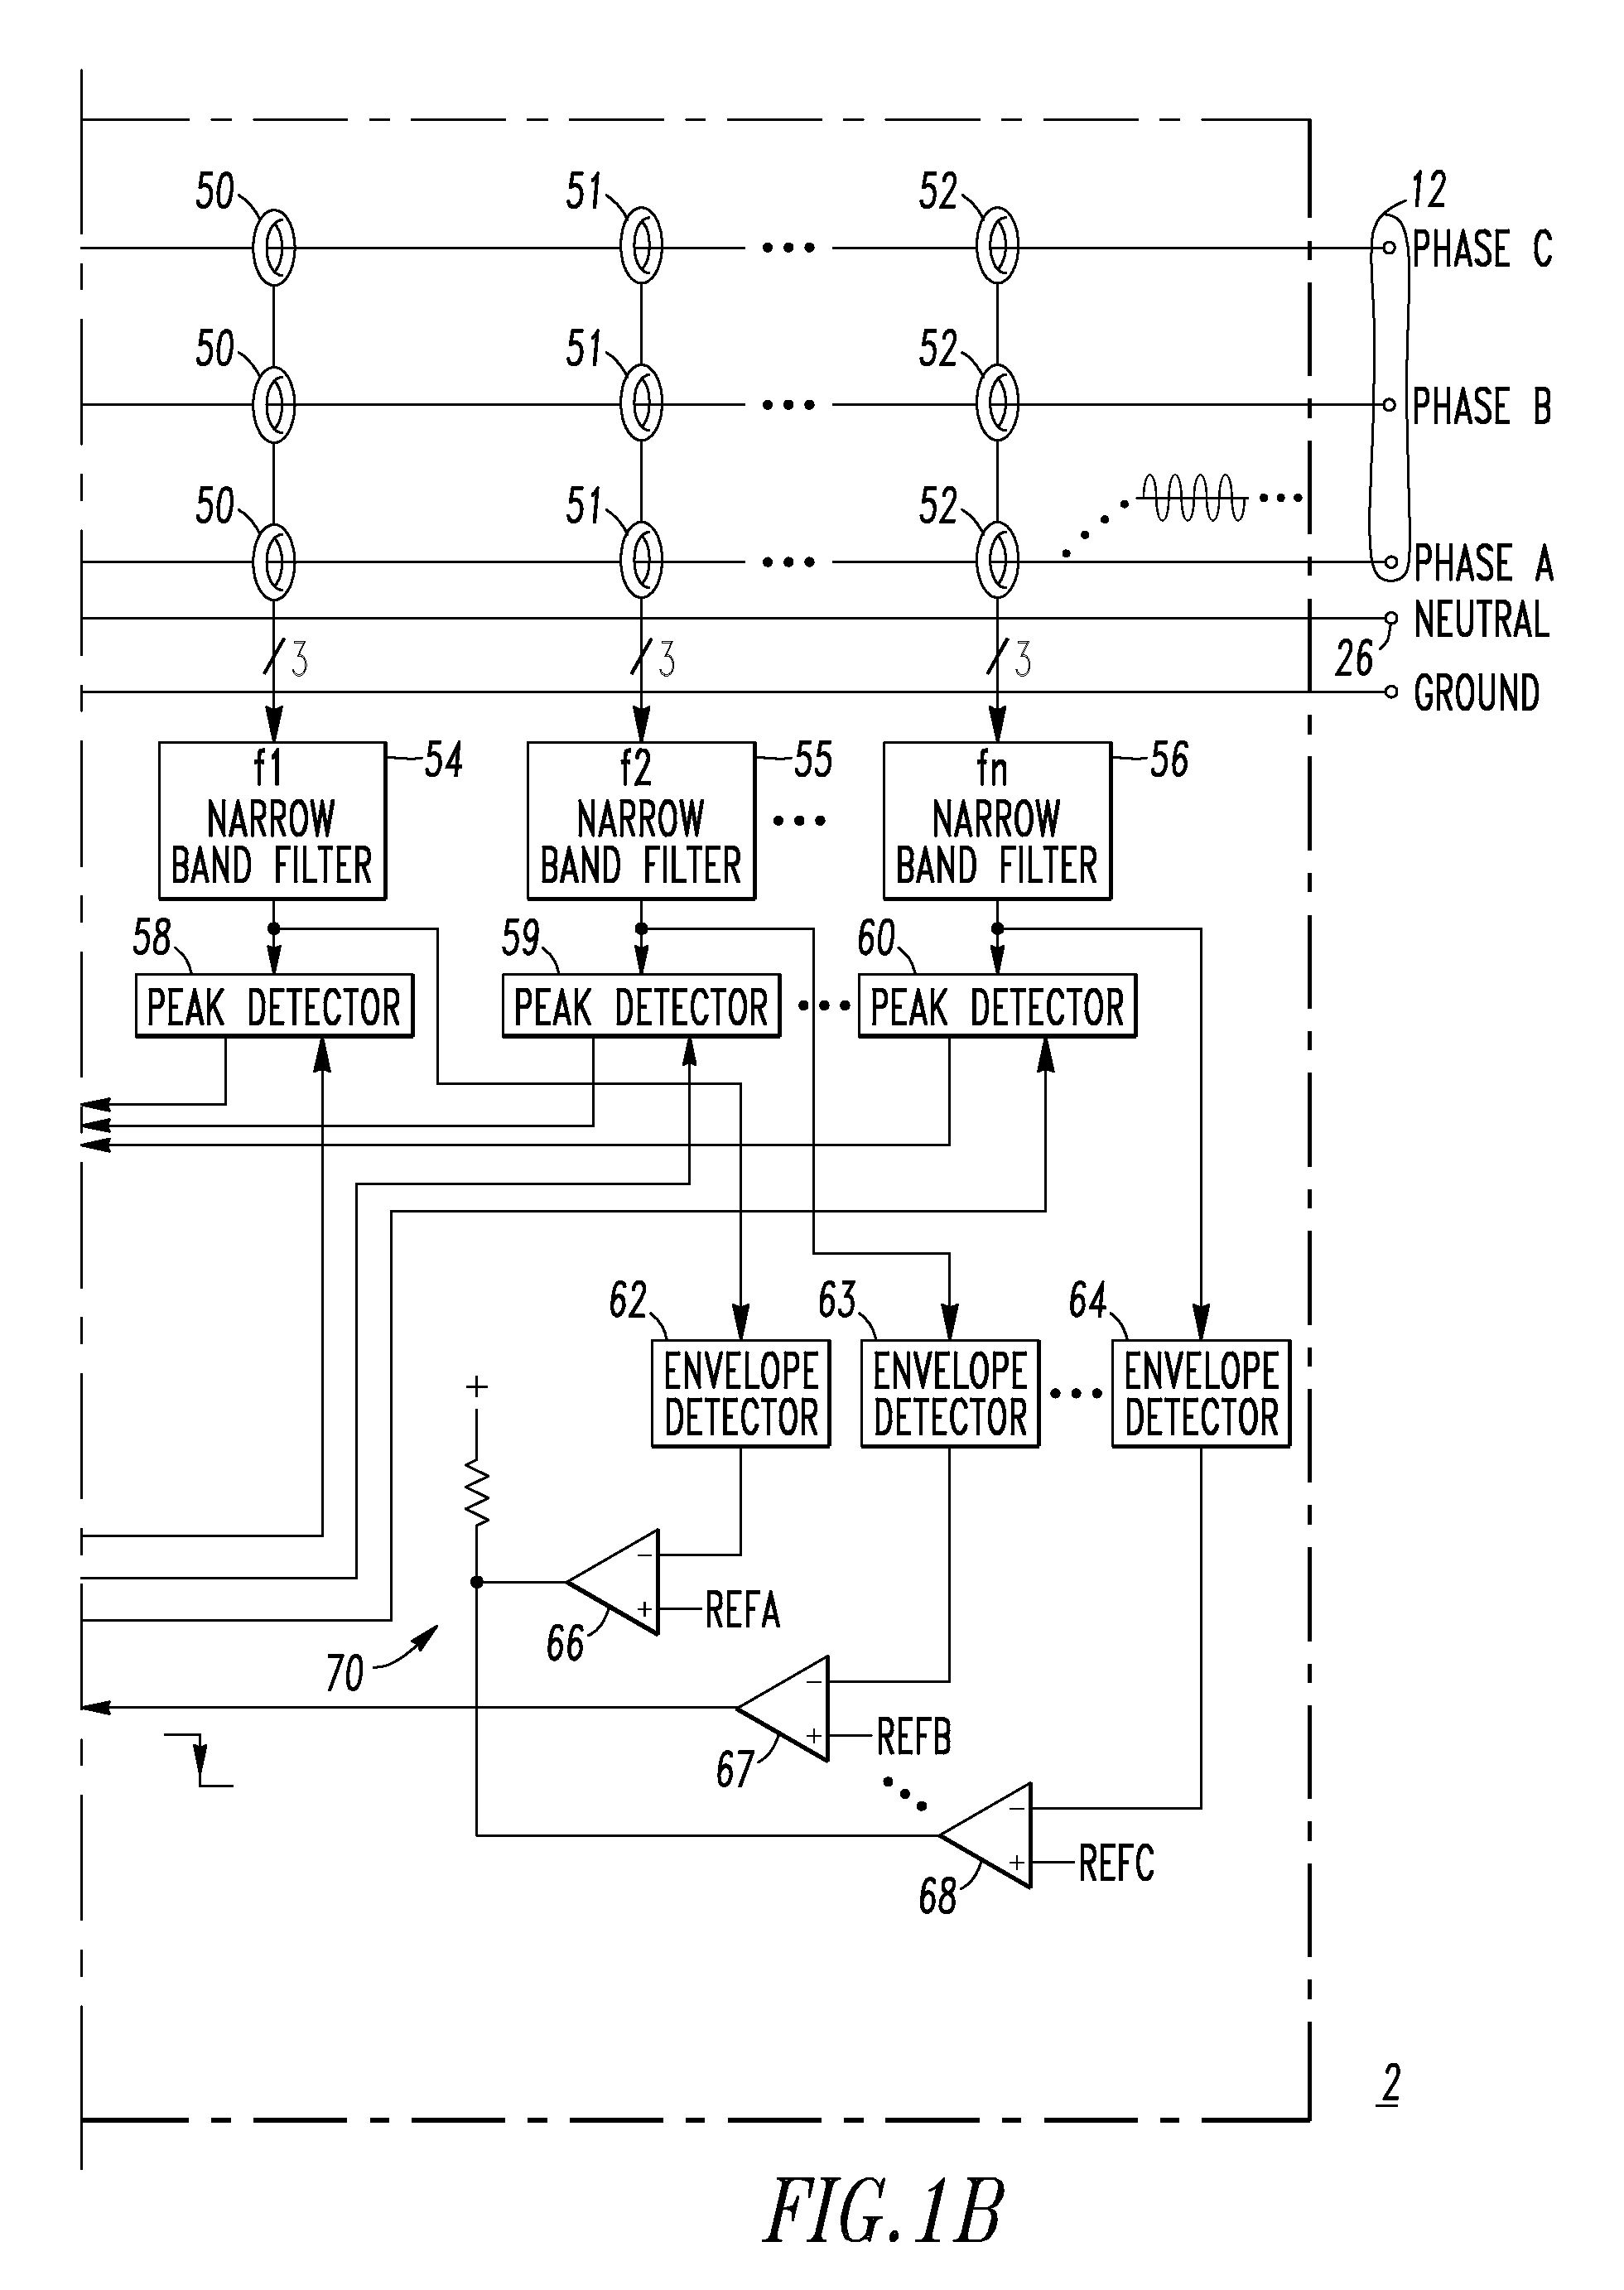 Industrial arc fault circuit interrupter and method of detecting arcing conditions